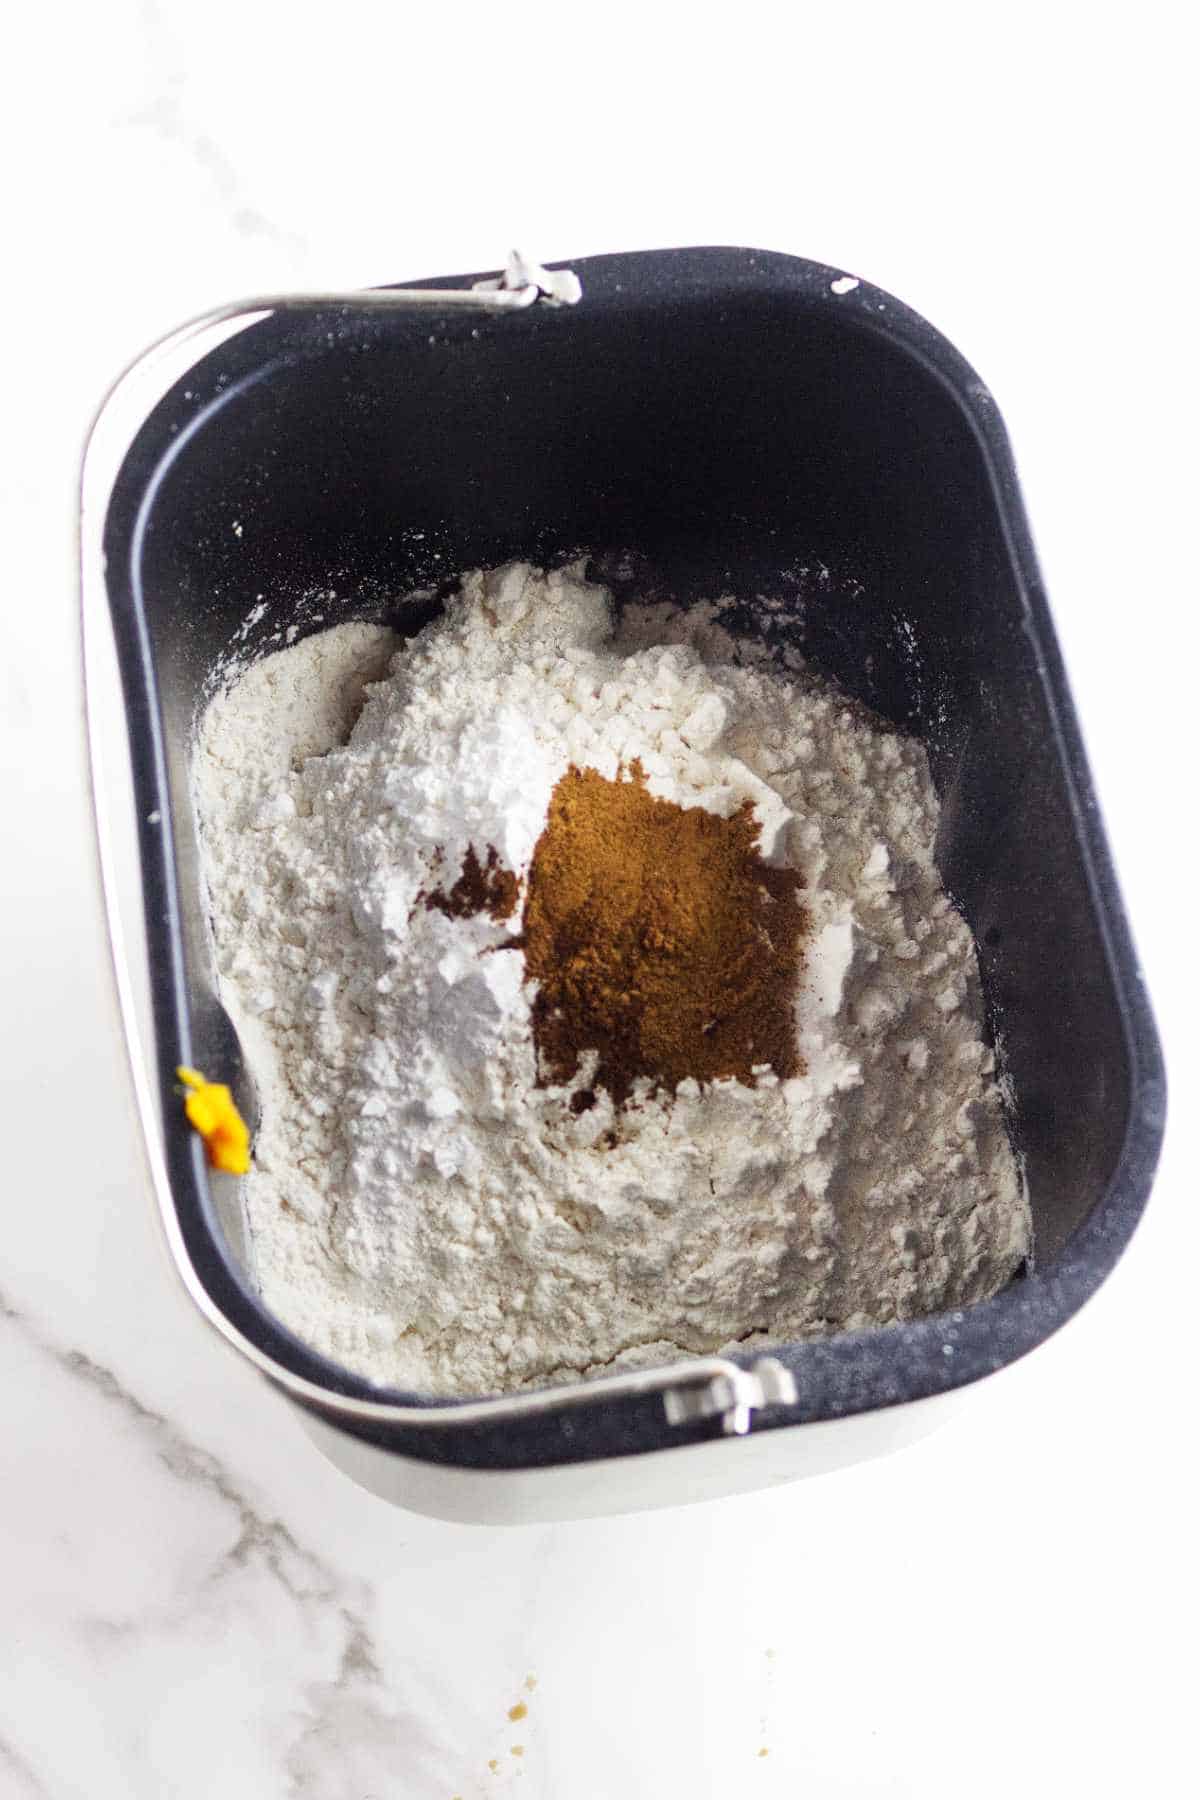 flour and spices added to breadmaker pan.